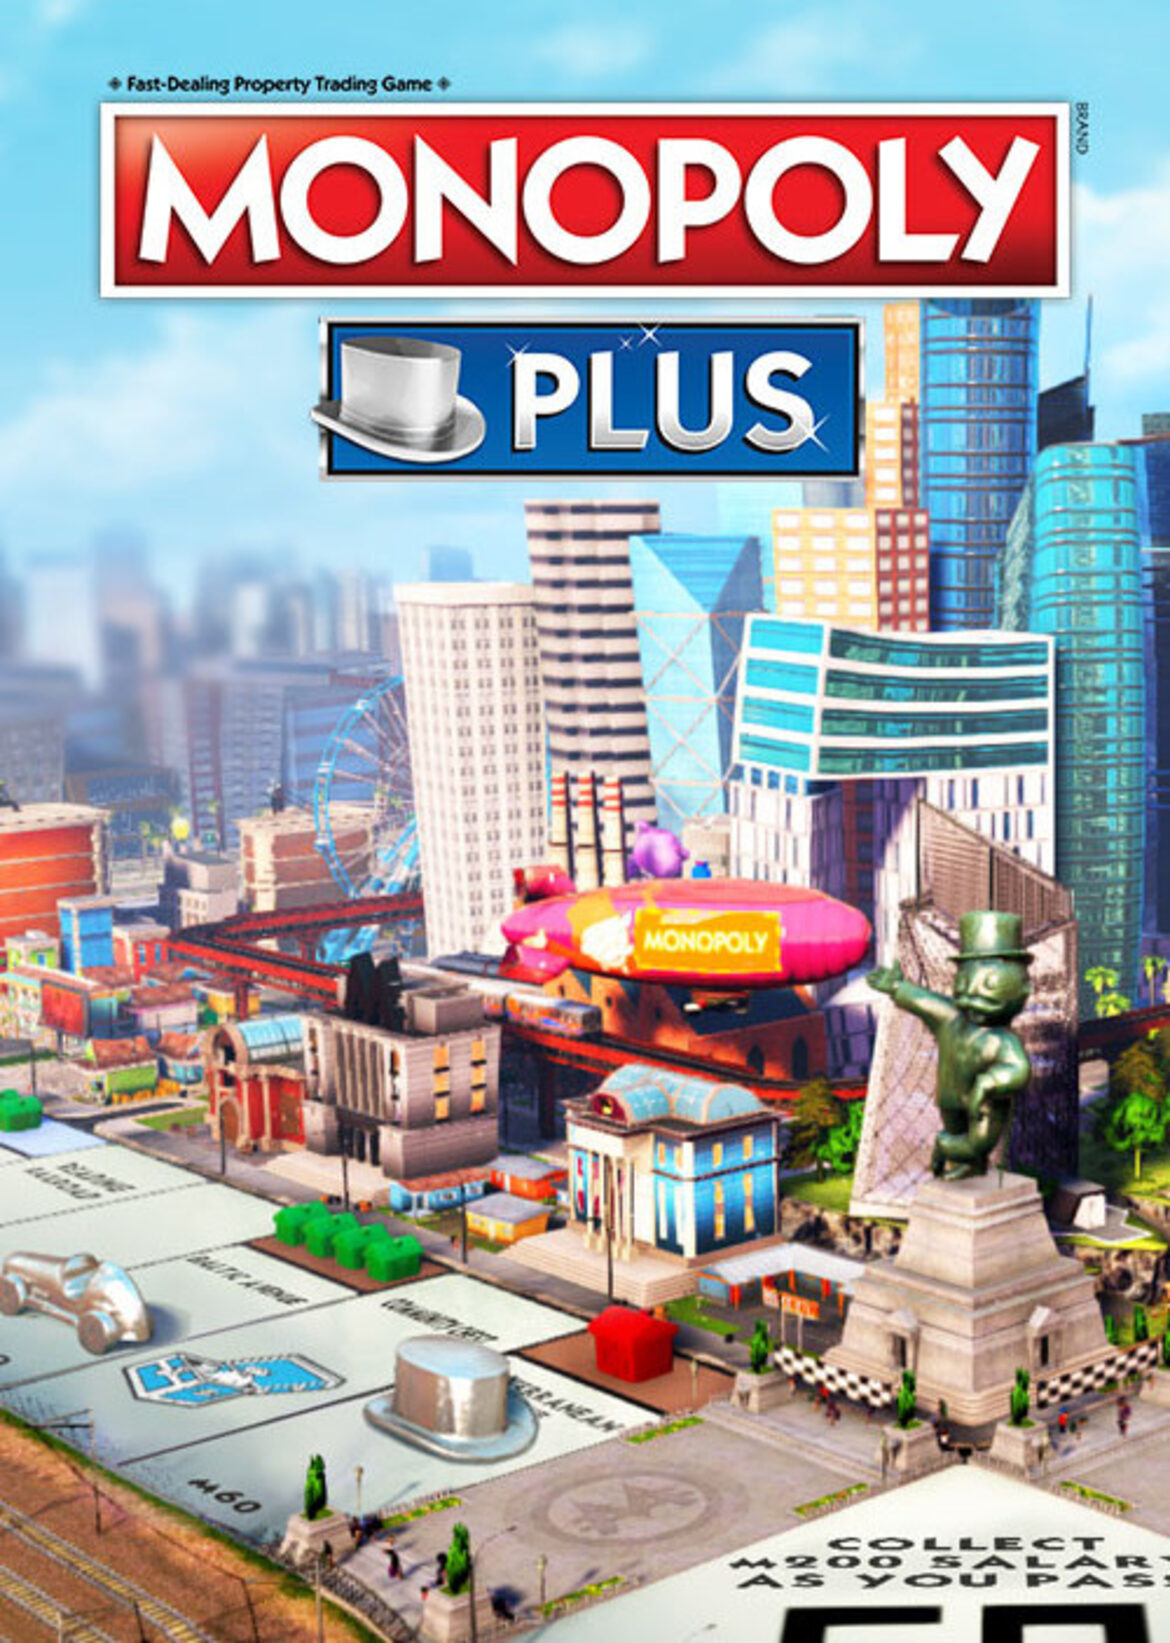 monopoly pc game 2020